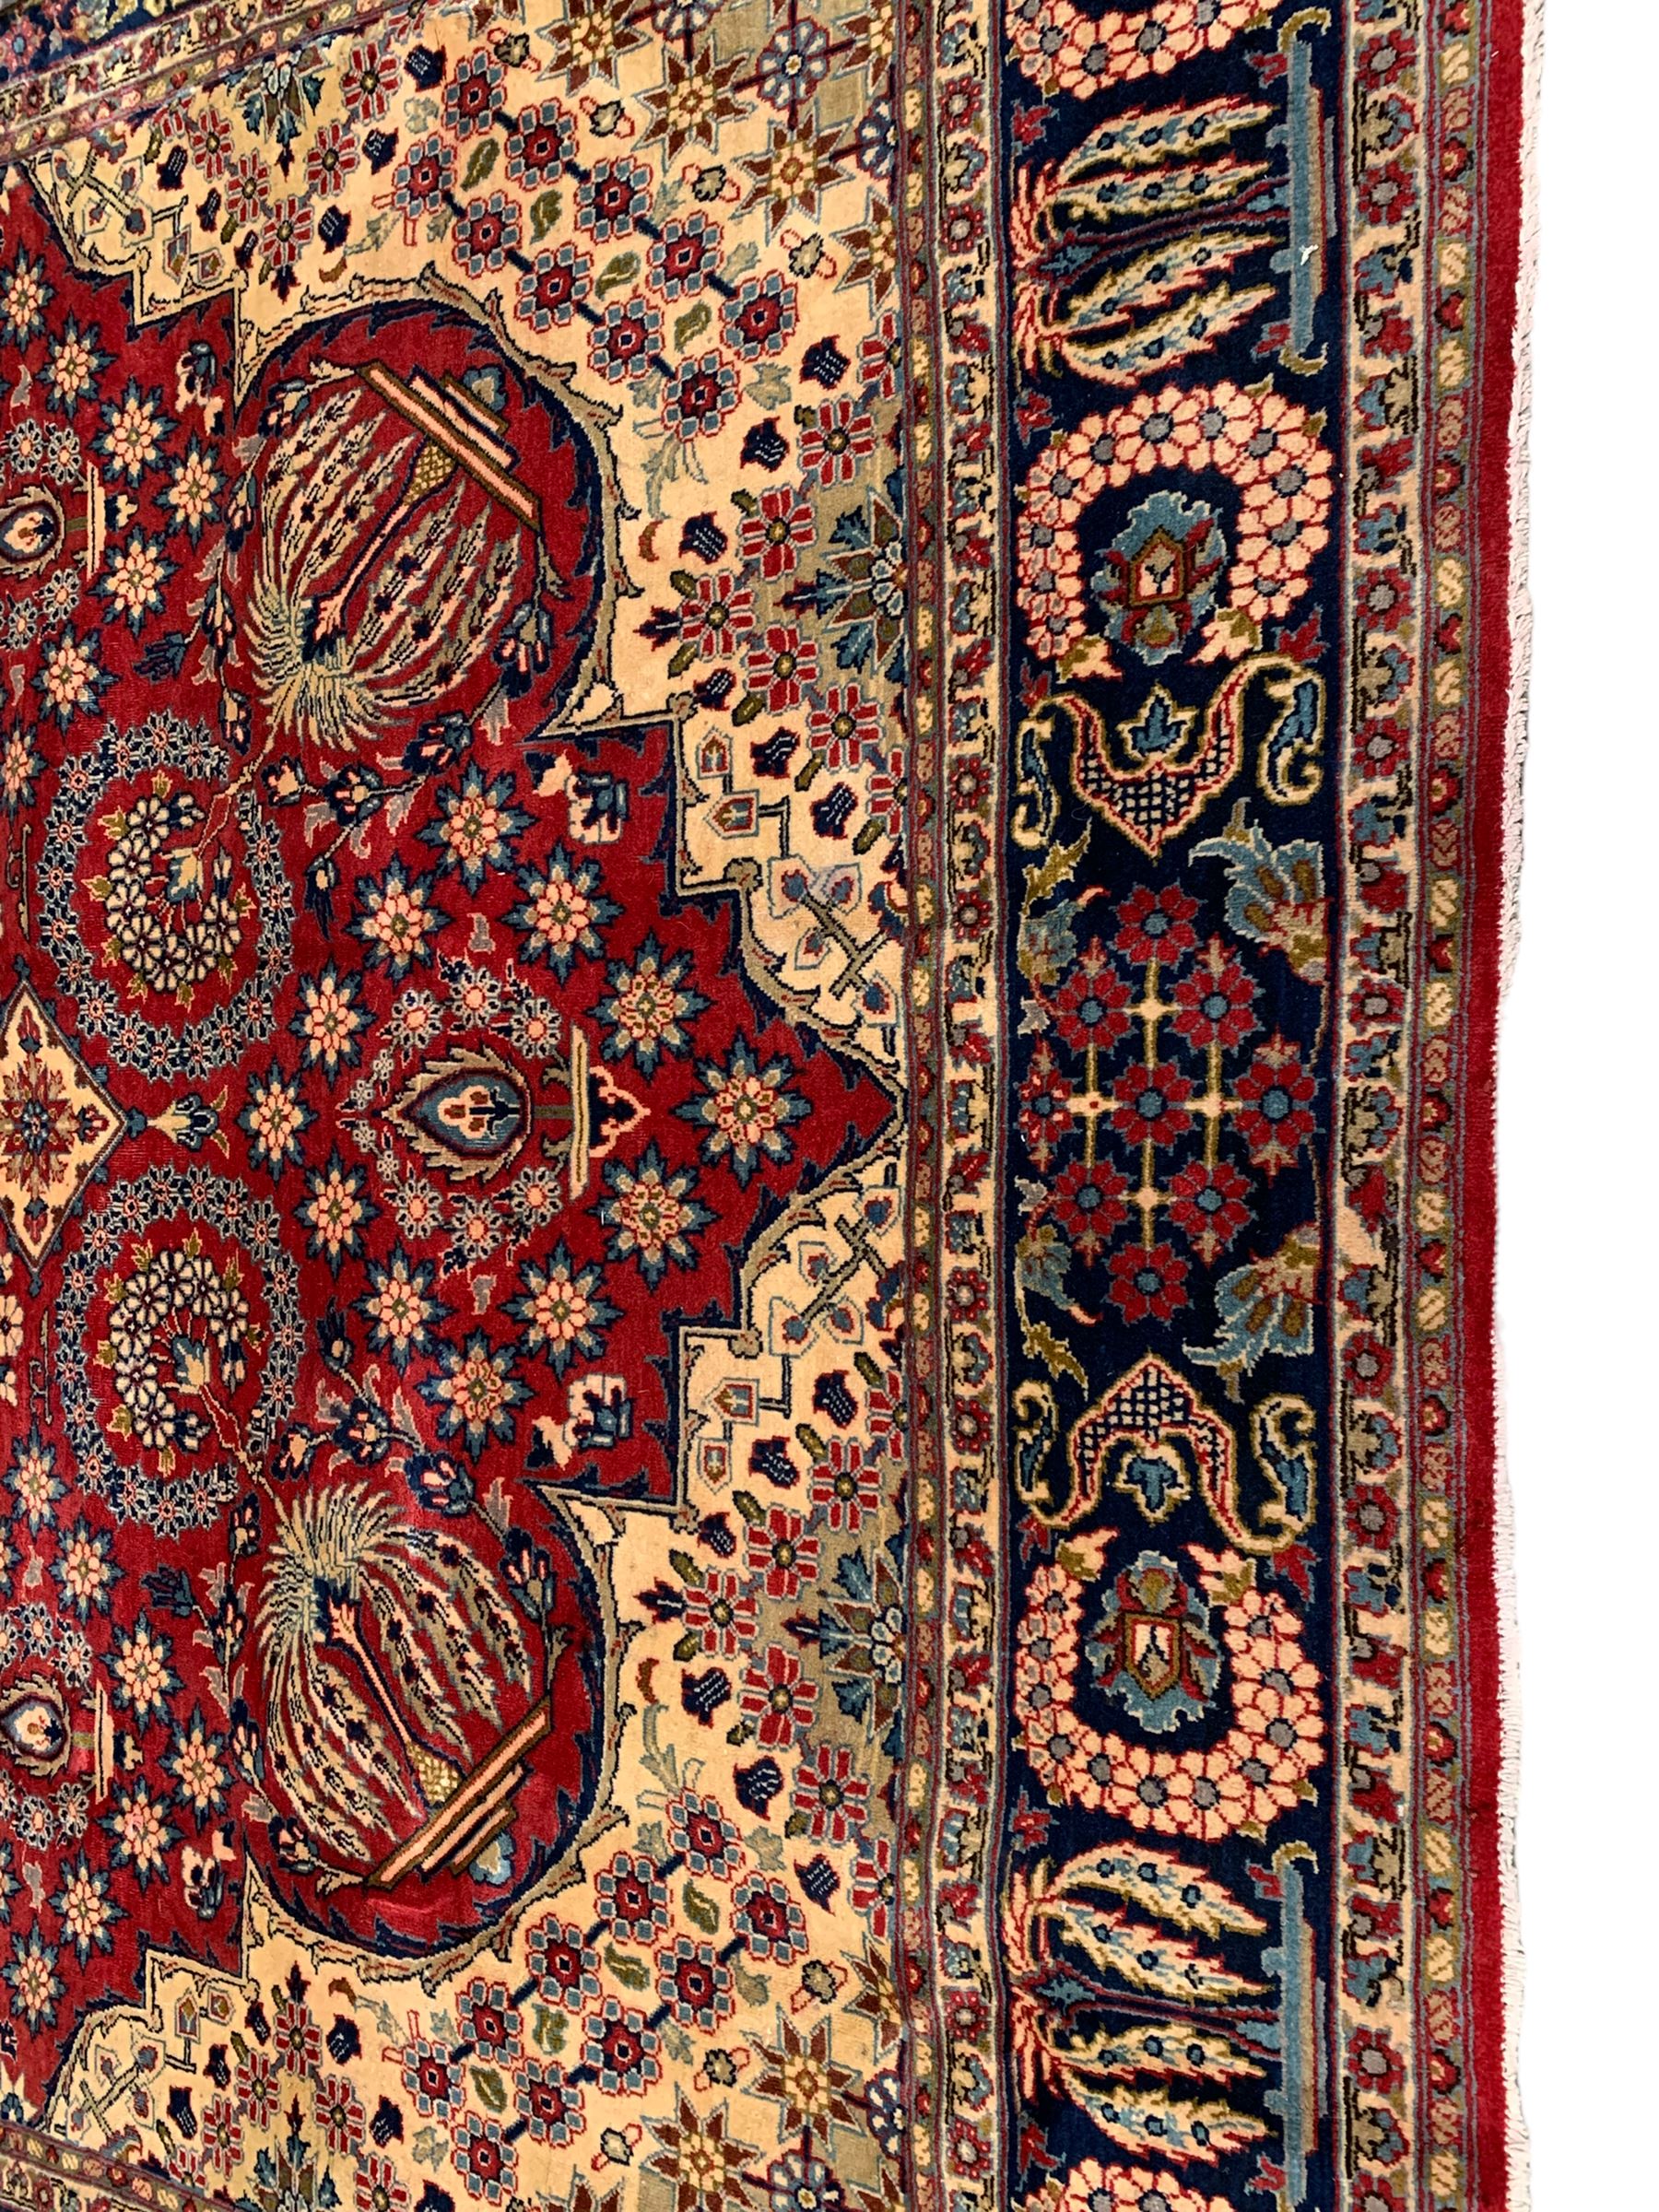 Persian red ground carpet - Image 10 of 10